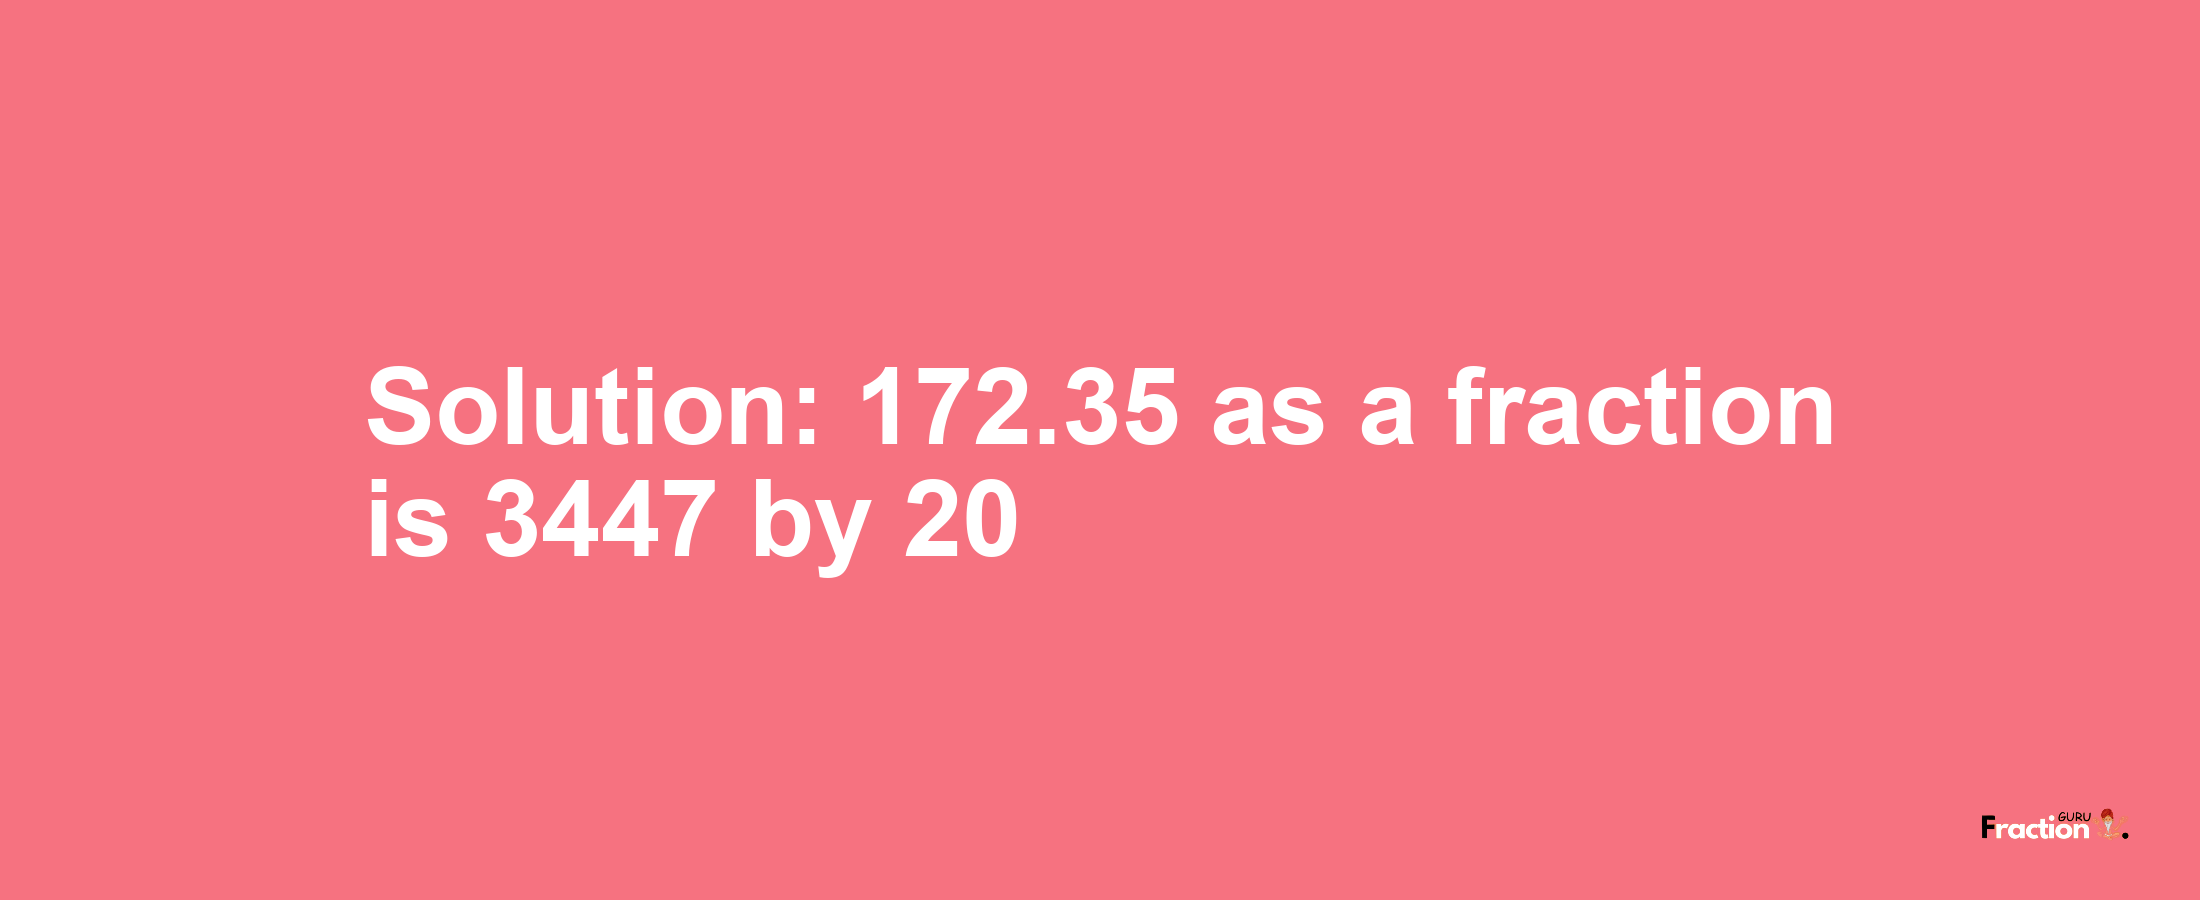 Solution:172.35 as a fraction is 3447/20